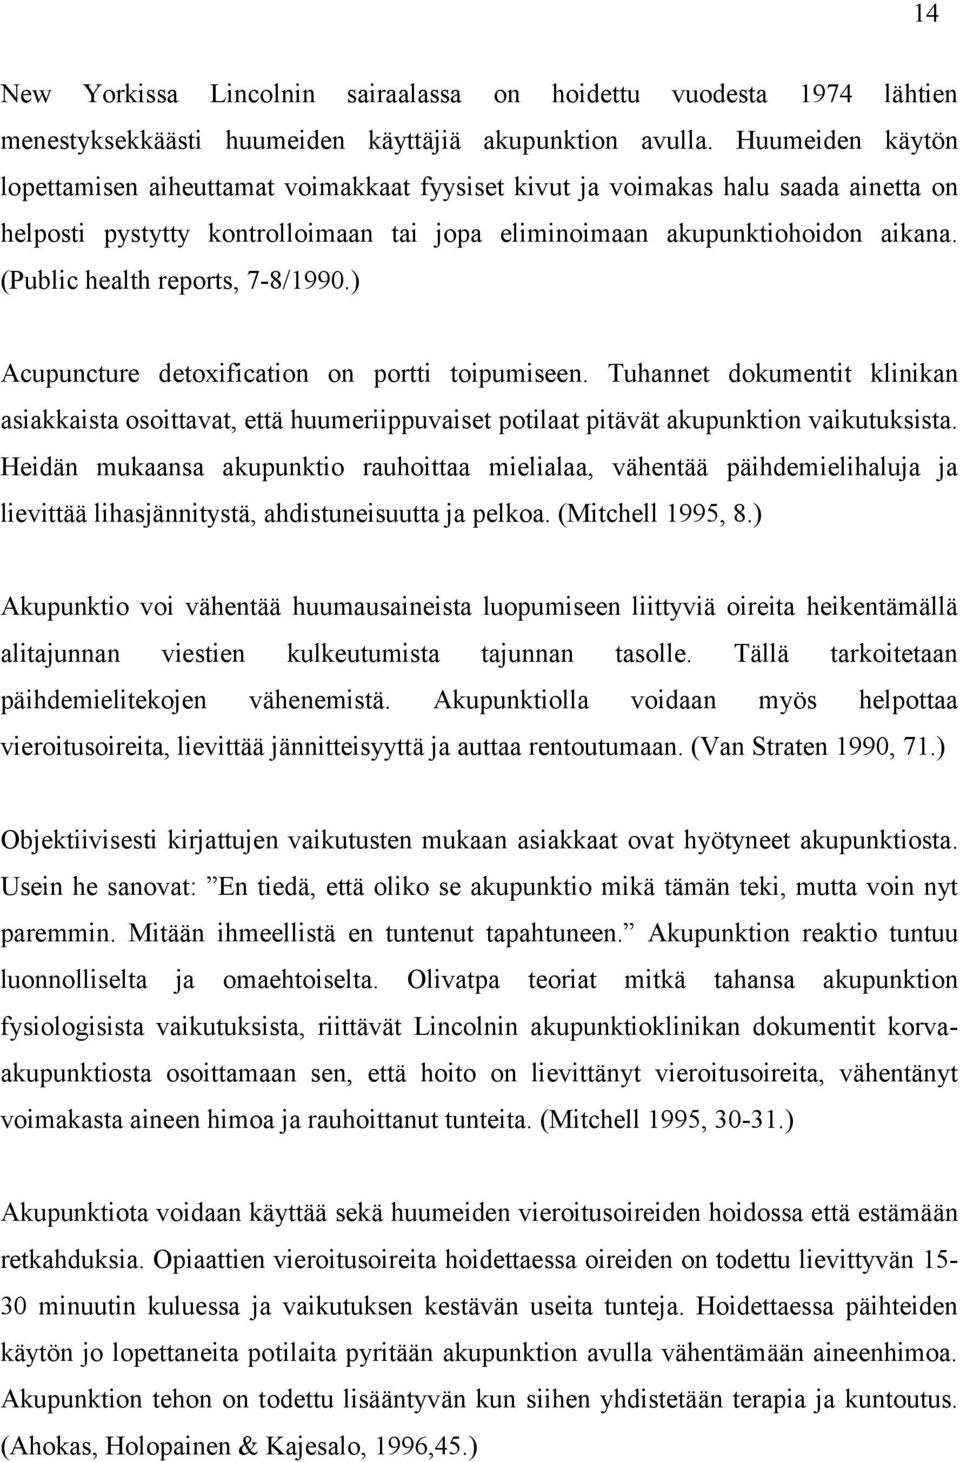 (Public health reports, 7-8/1990.) Acupuncture detoxification on portti toipumiseen.